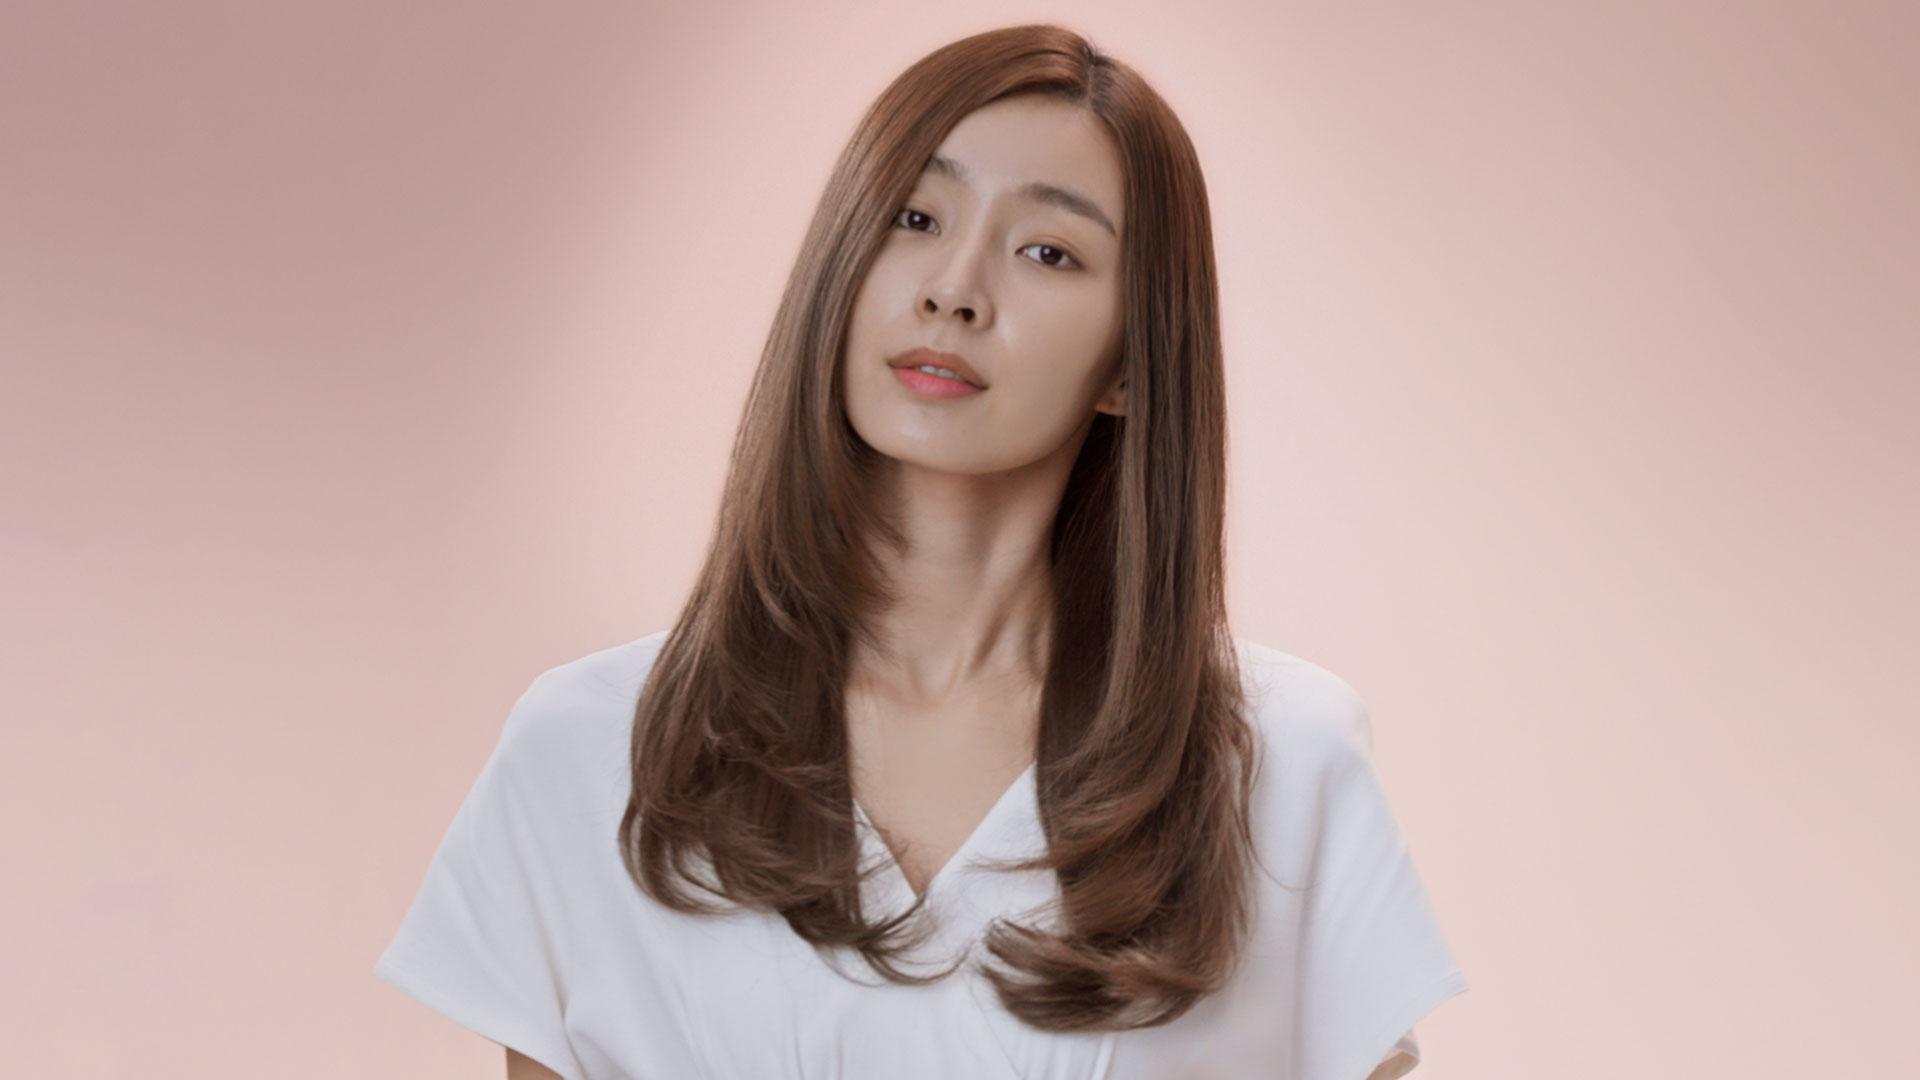 Model with smooth and sleek hair